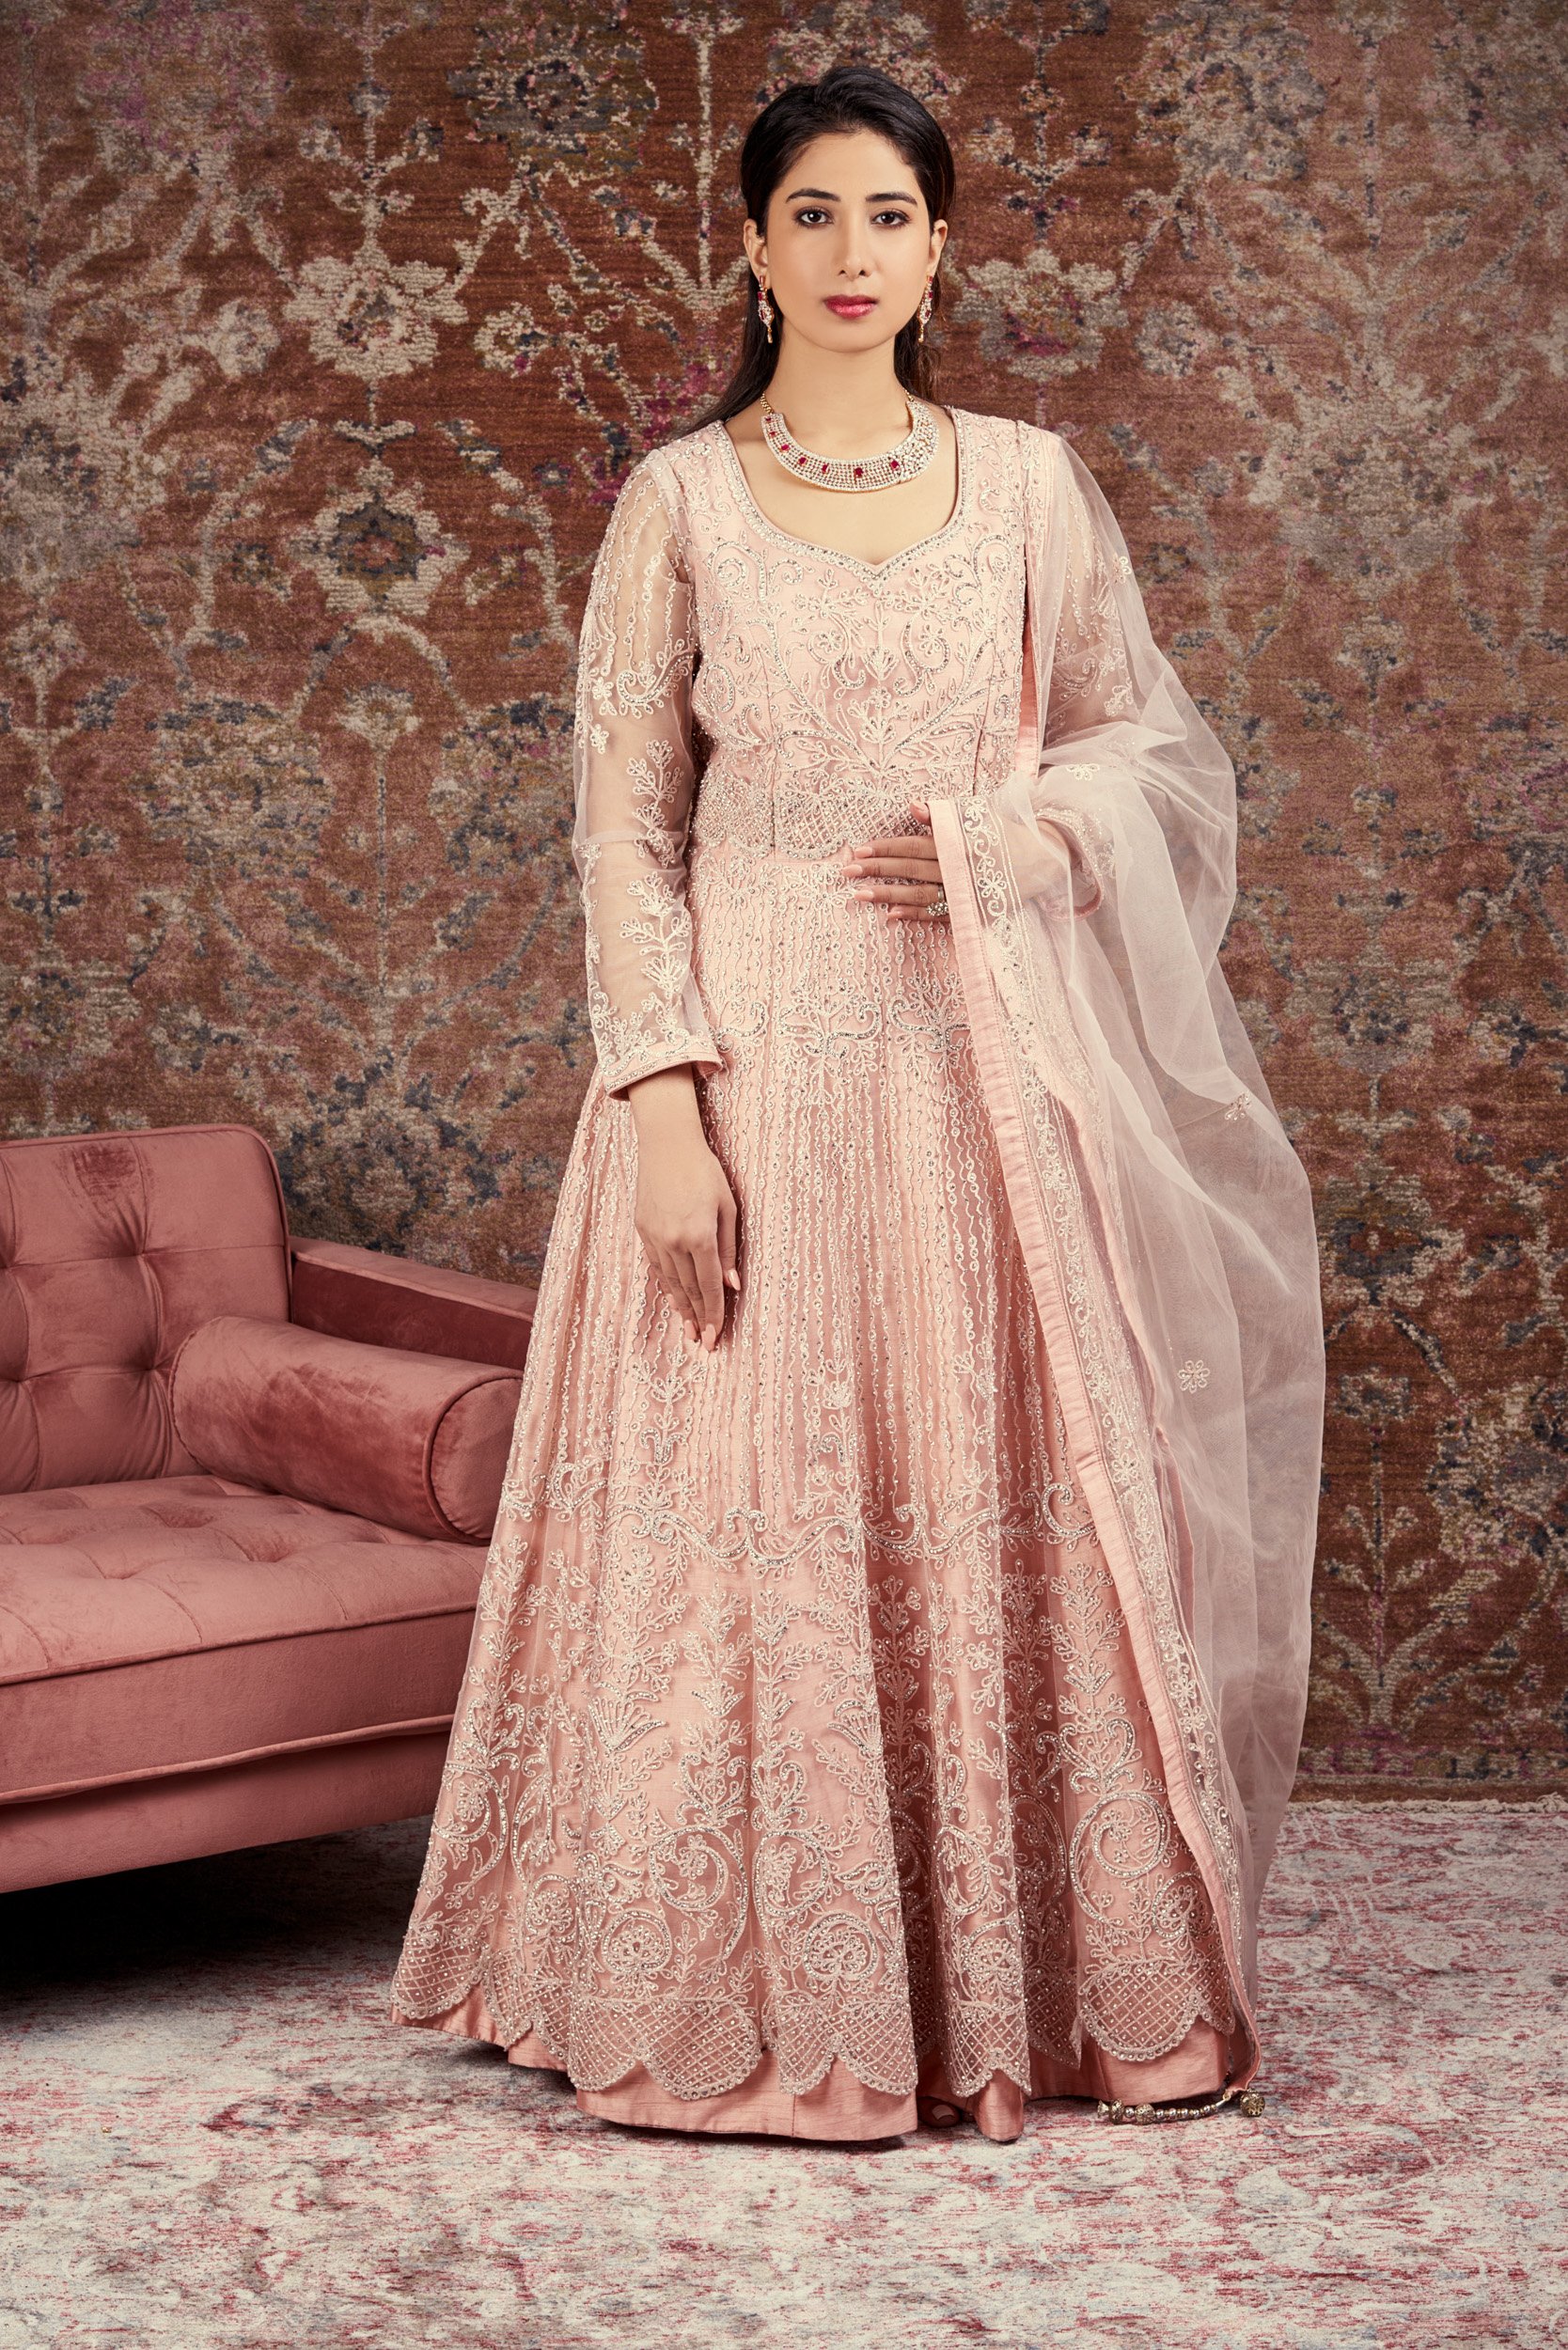 Gown in Coral Peach Embroidered Fabric LSTV122127